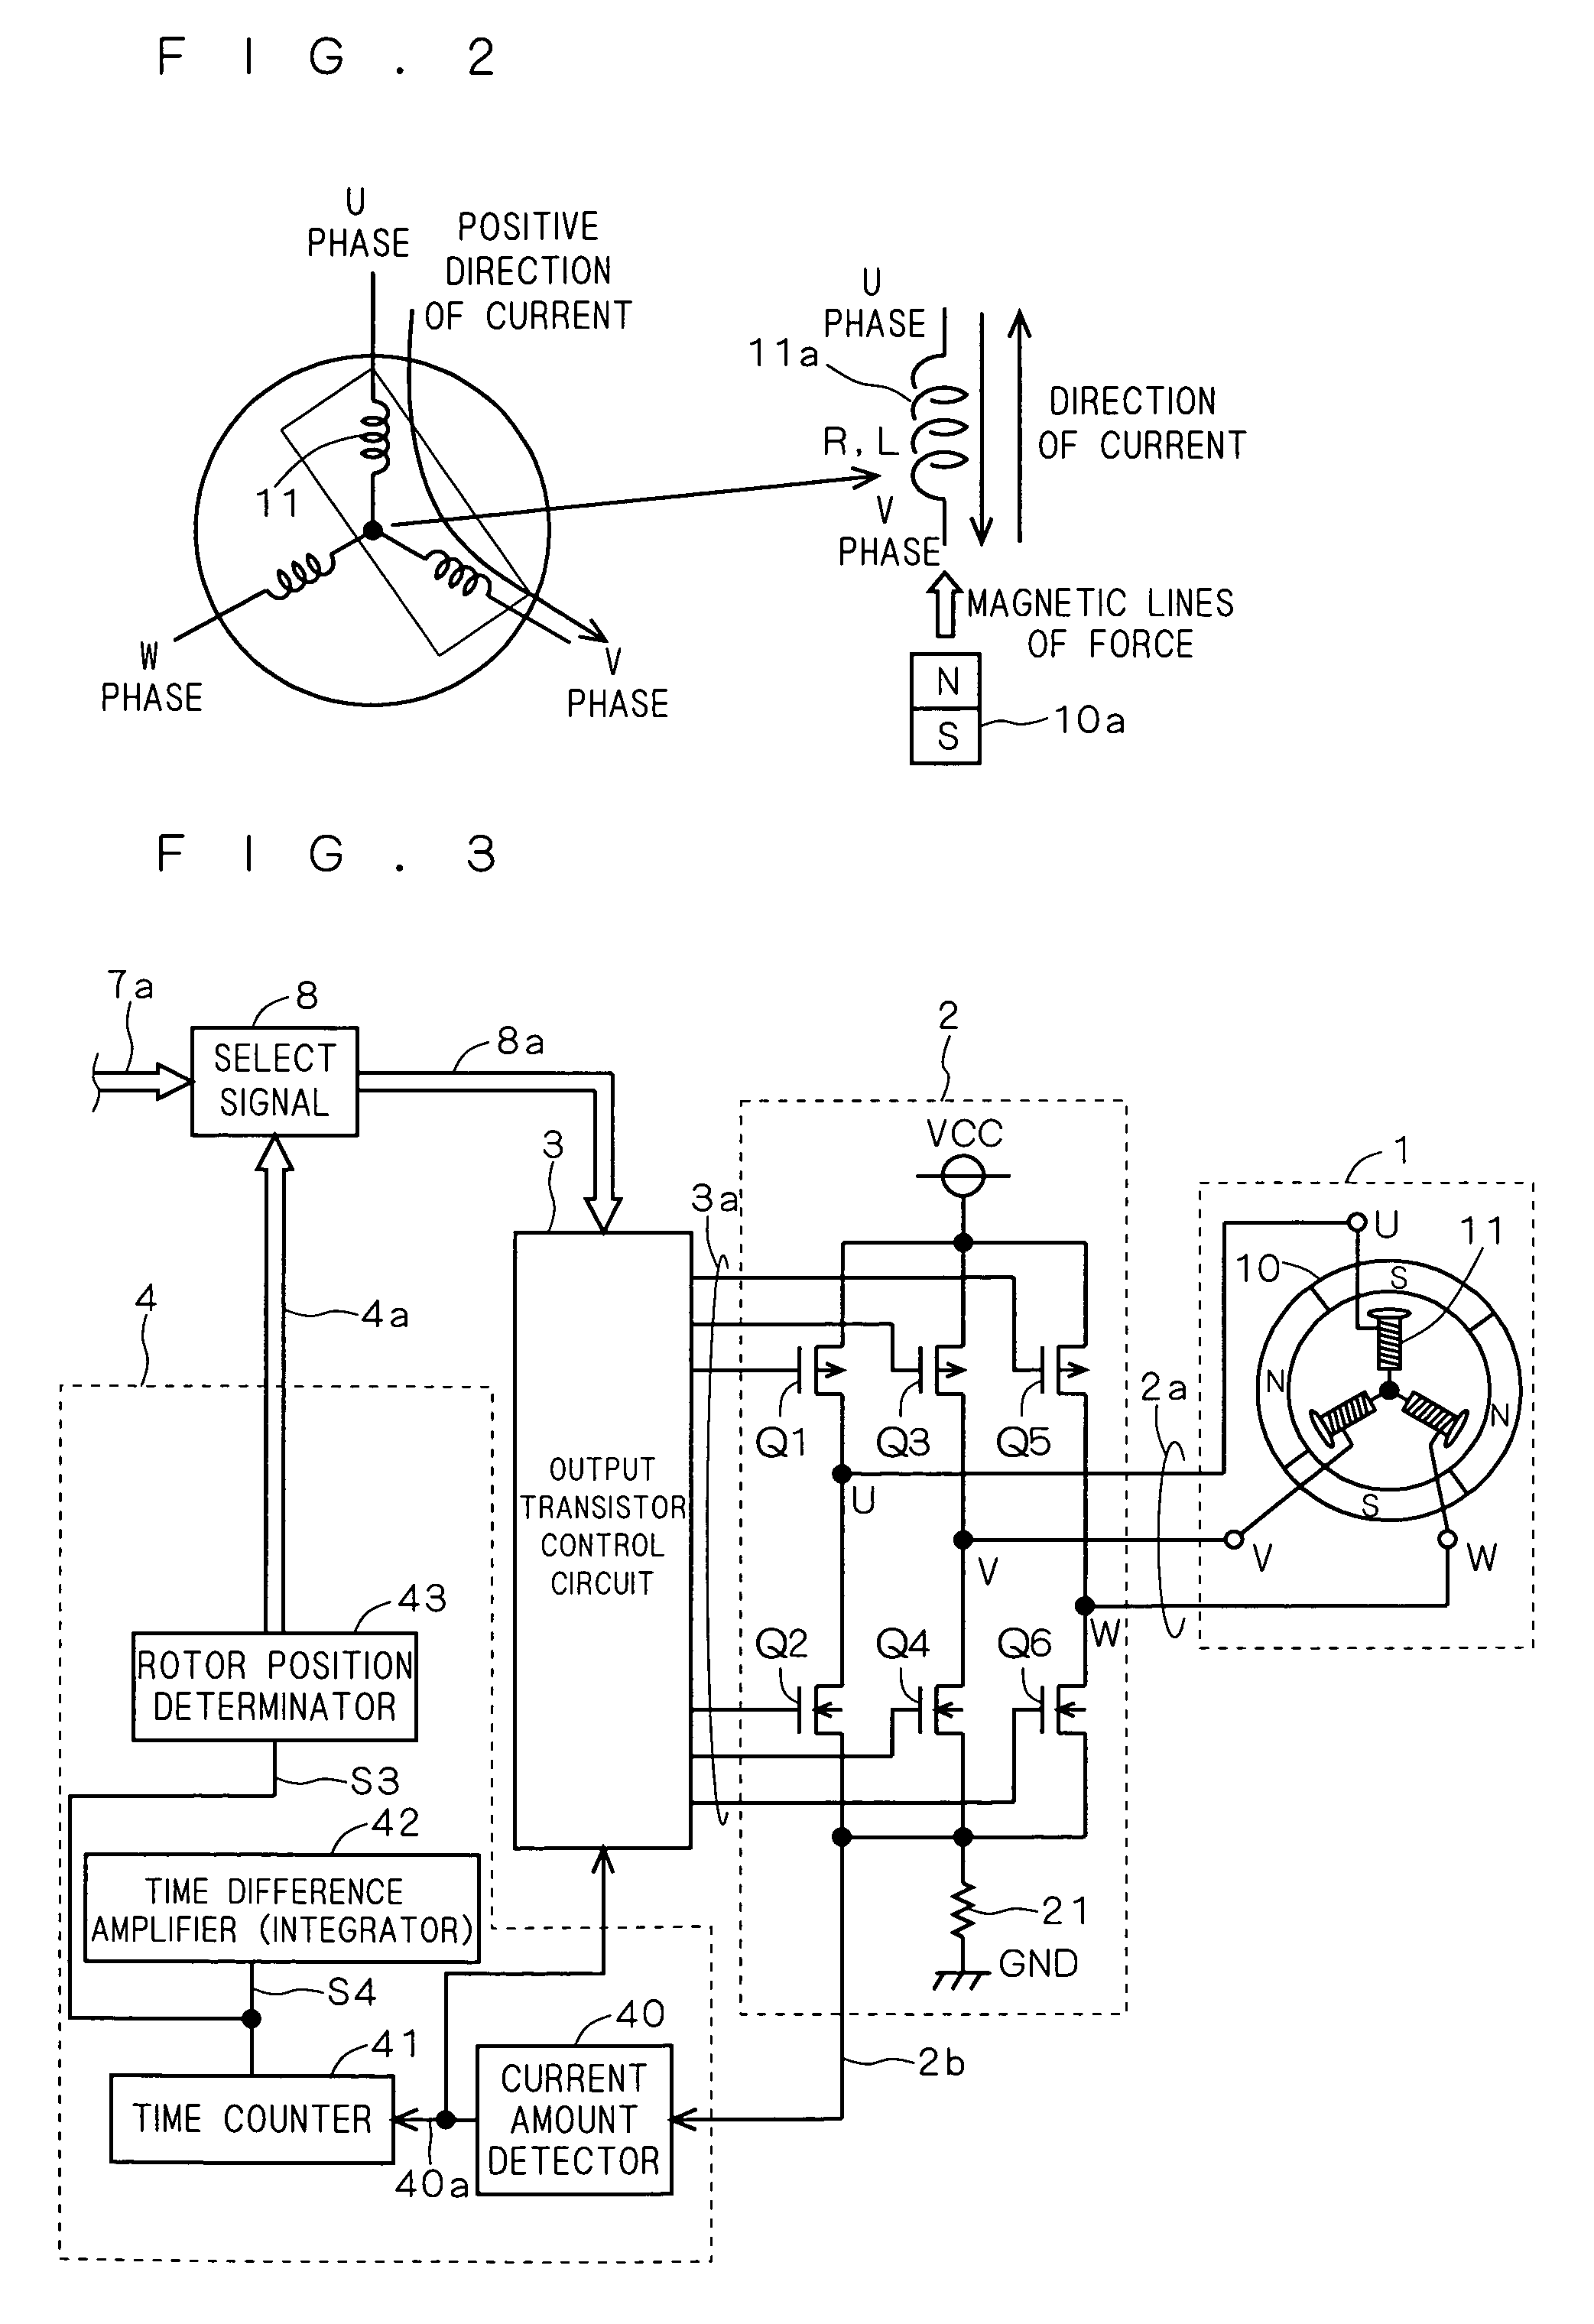 Stationary position detection circuit and motor drive circuit